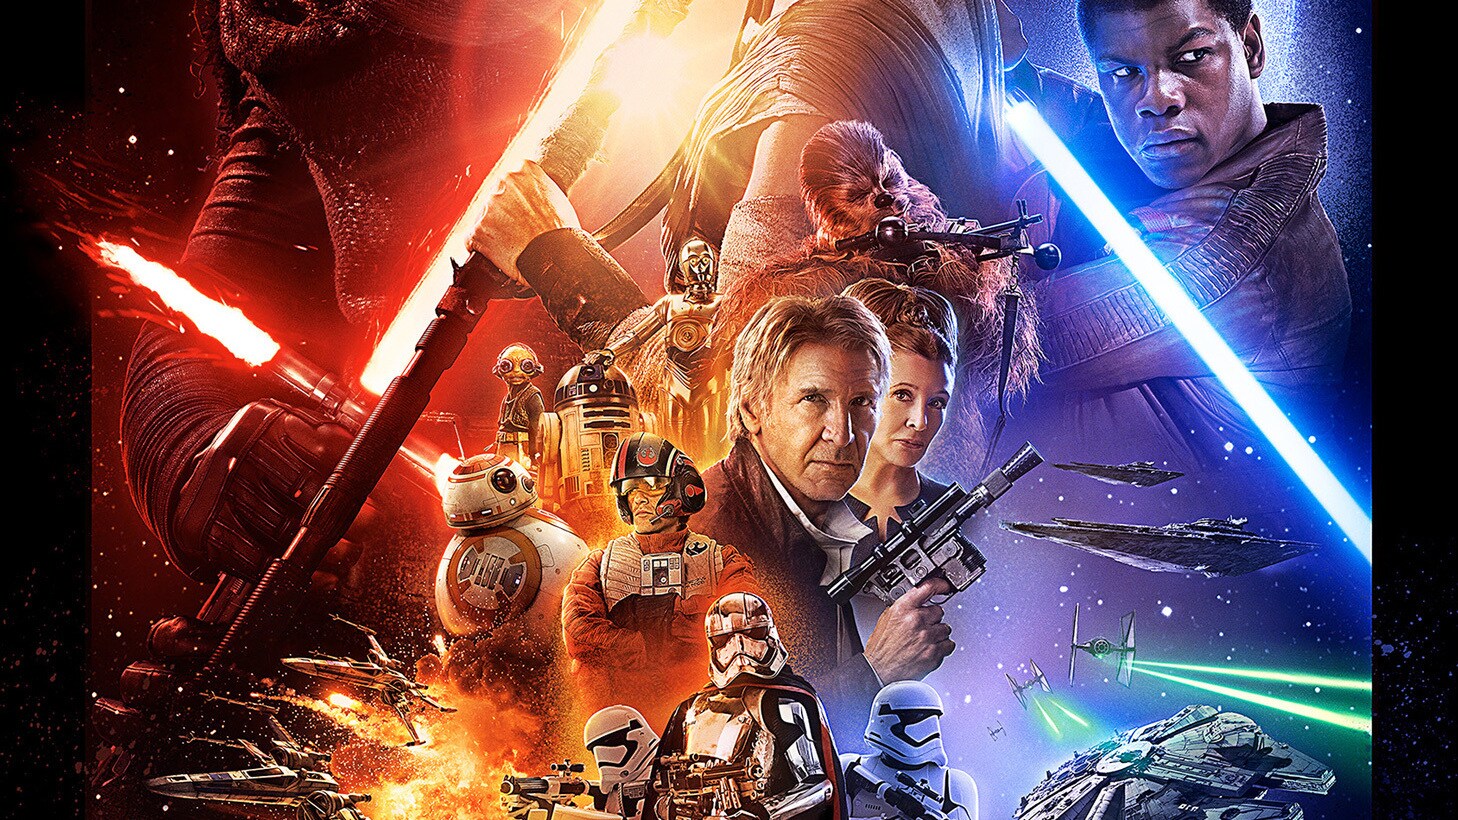 Poll: Who is Your Favorite Character Introduced in Star Wars: The Force Awakens?